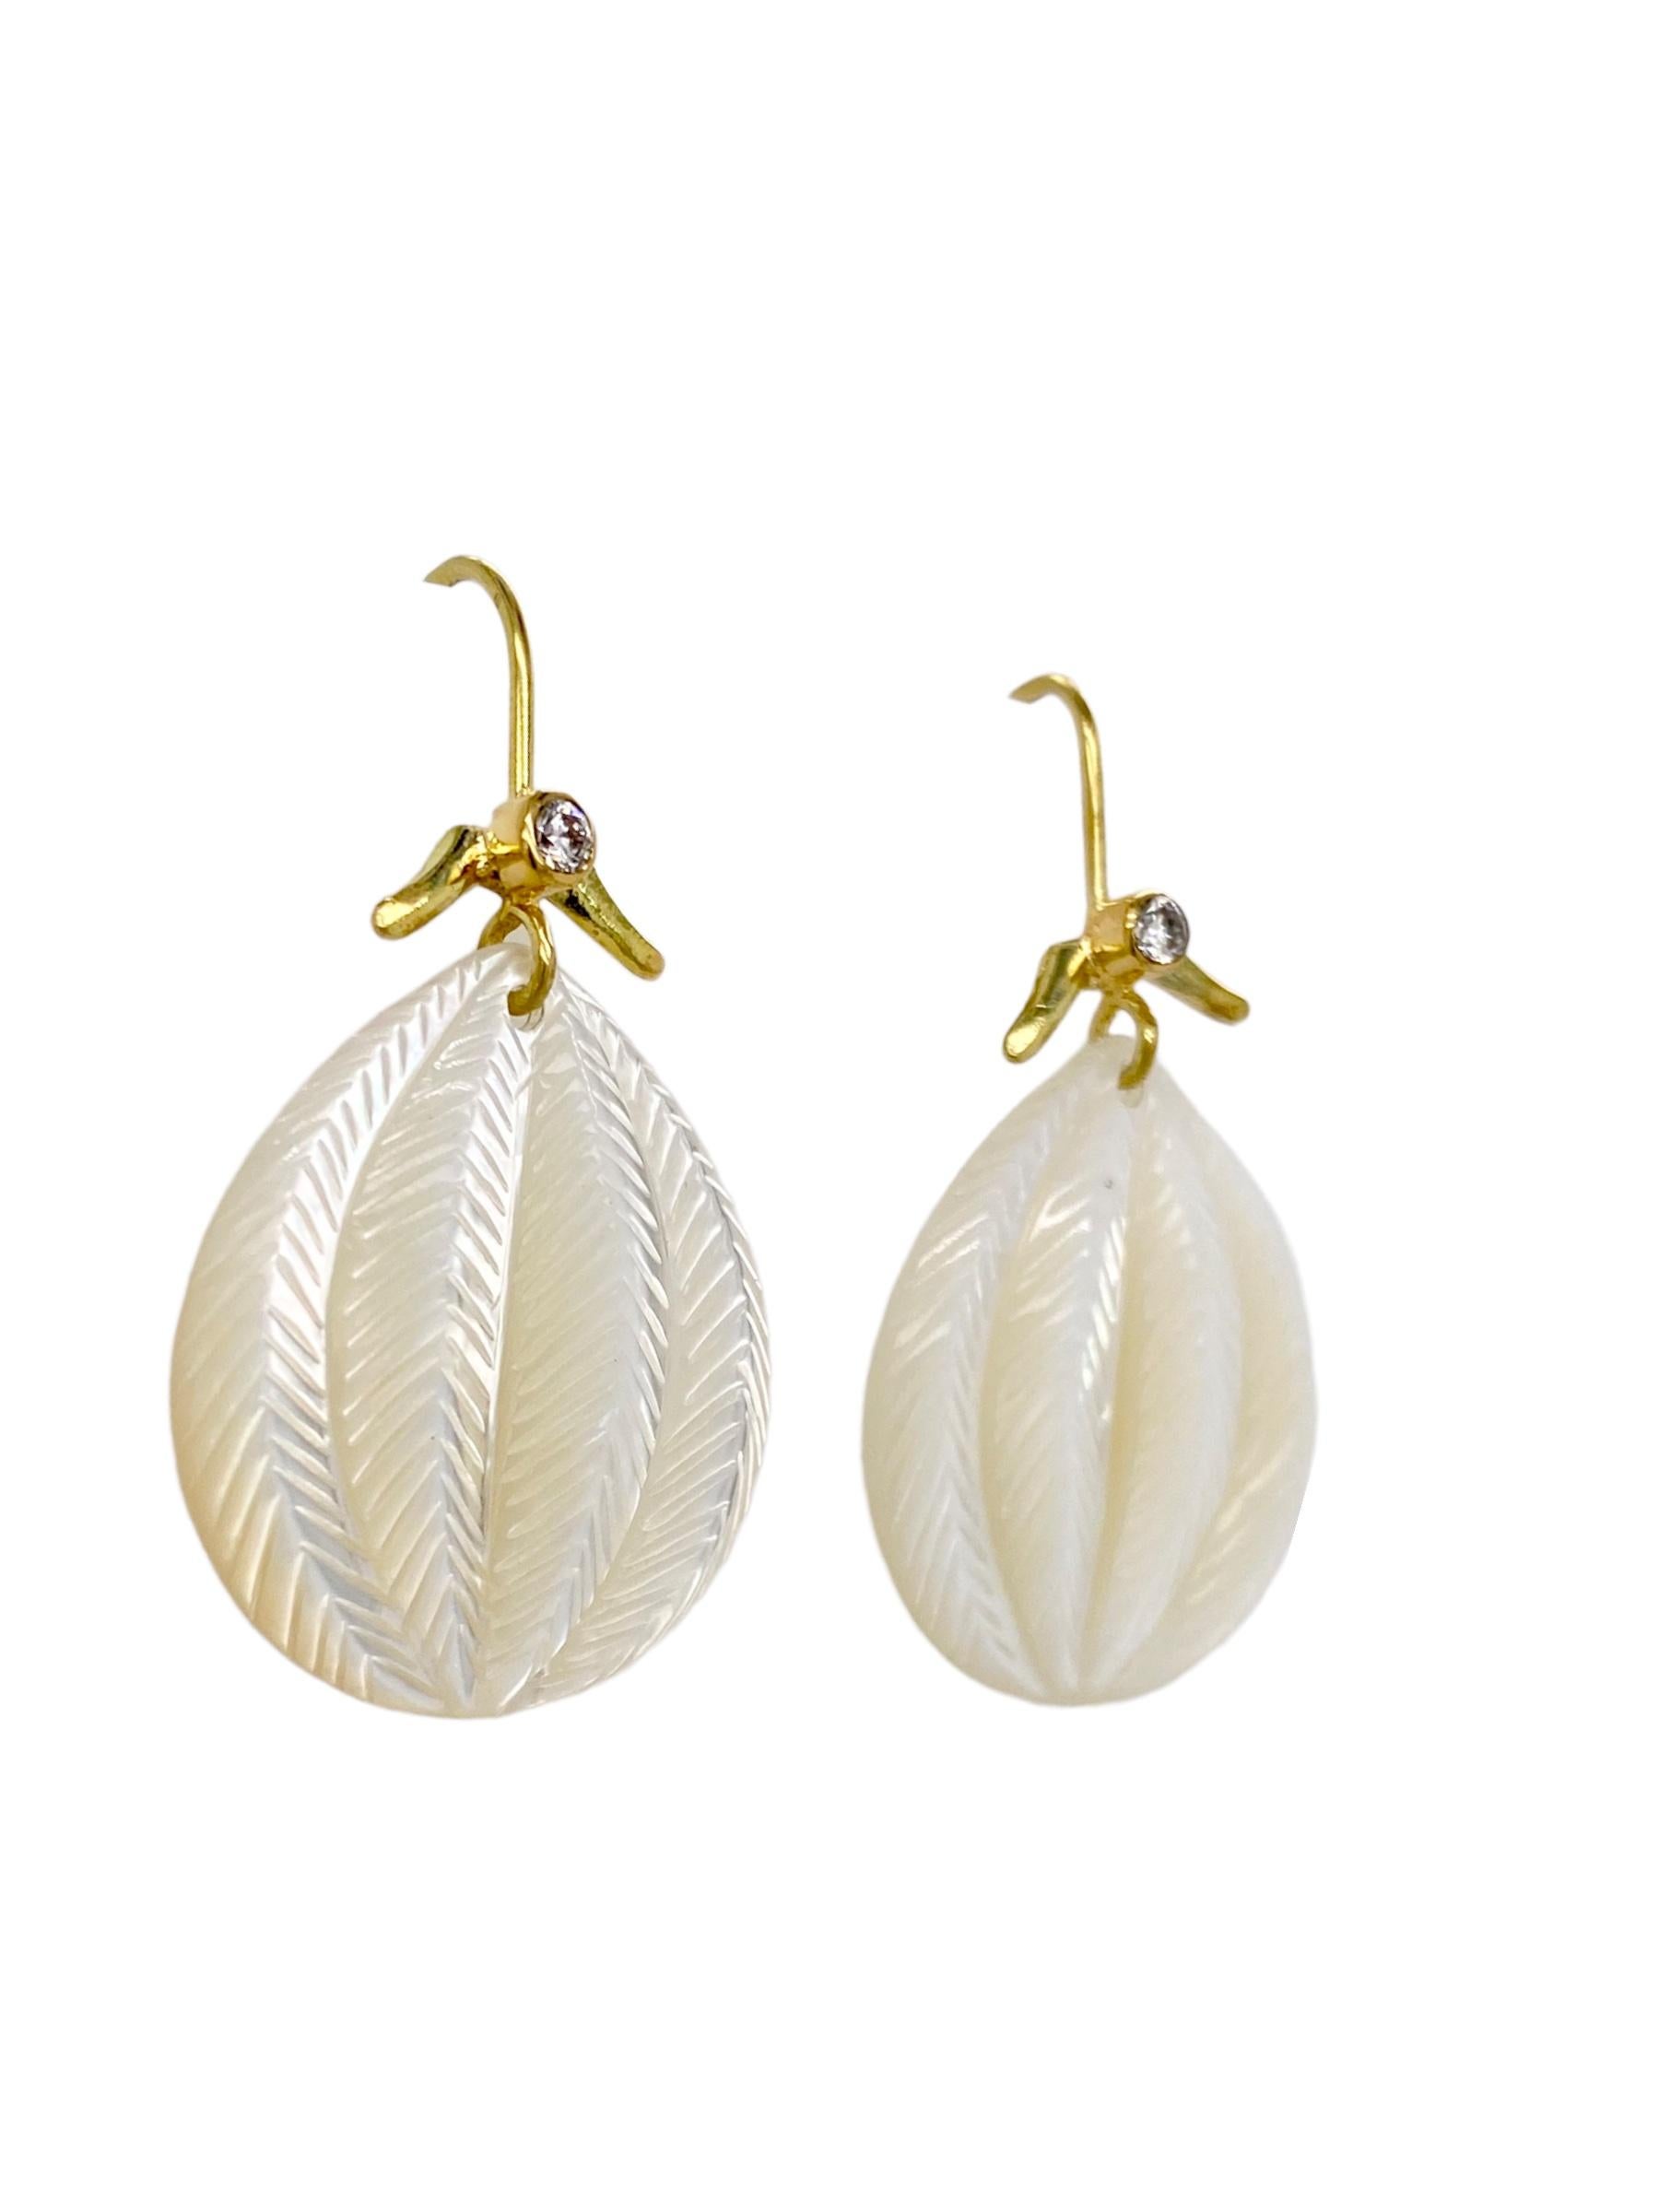 Brilliant Cut Carved Mother of Pearl earring with Sea Urchin Design w/ Diamonds by K. Ataumbi For Sale